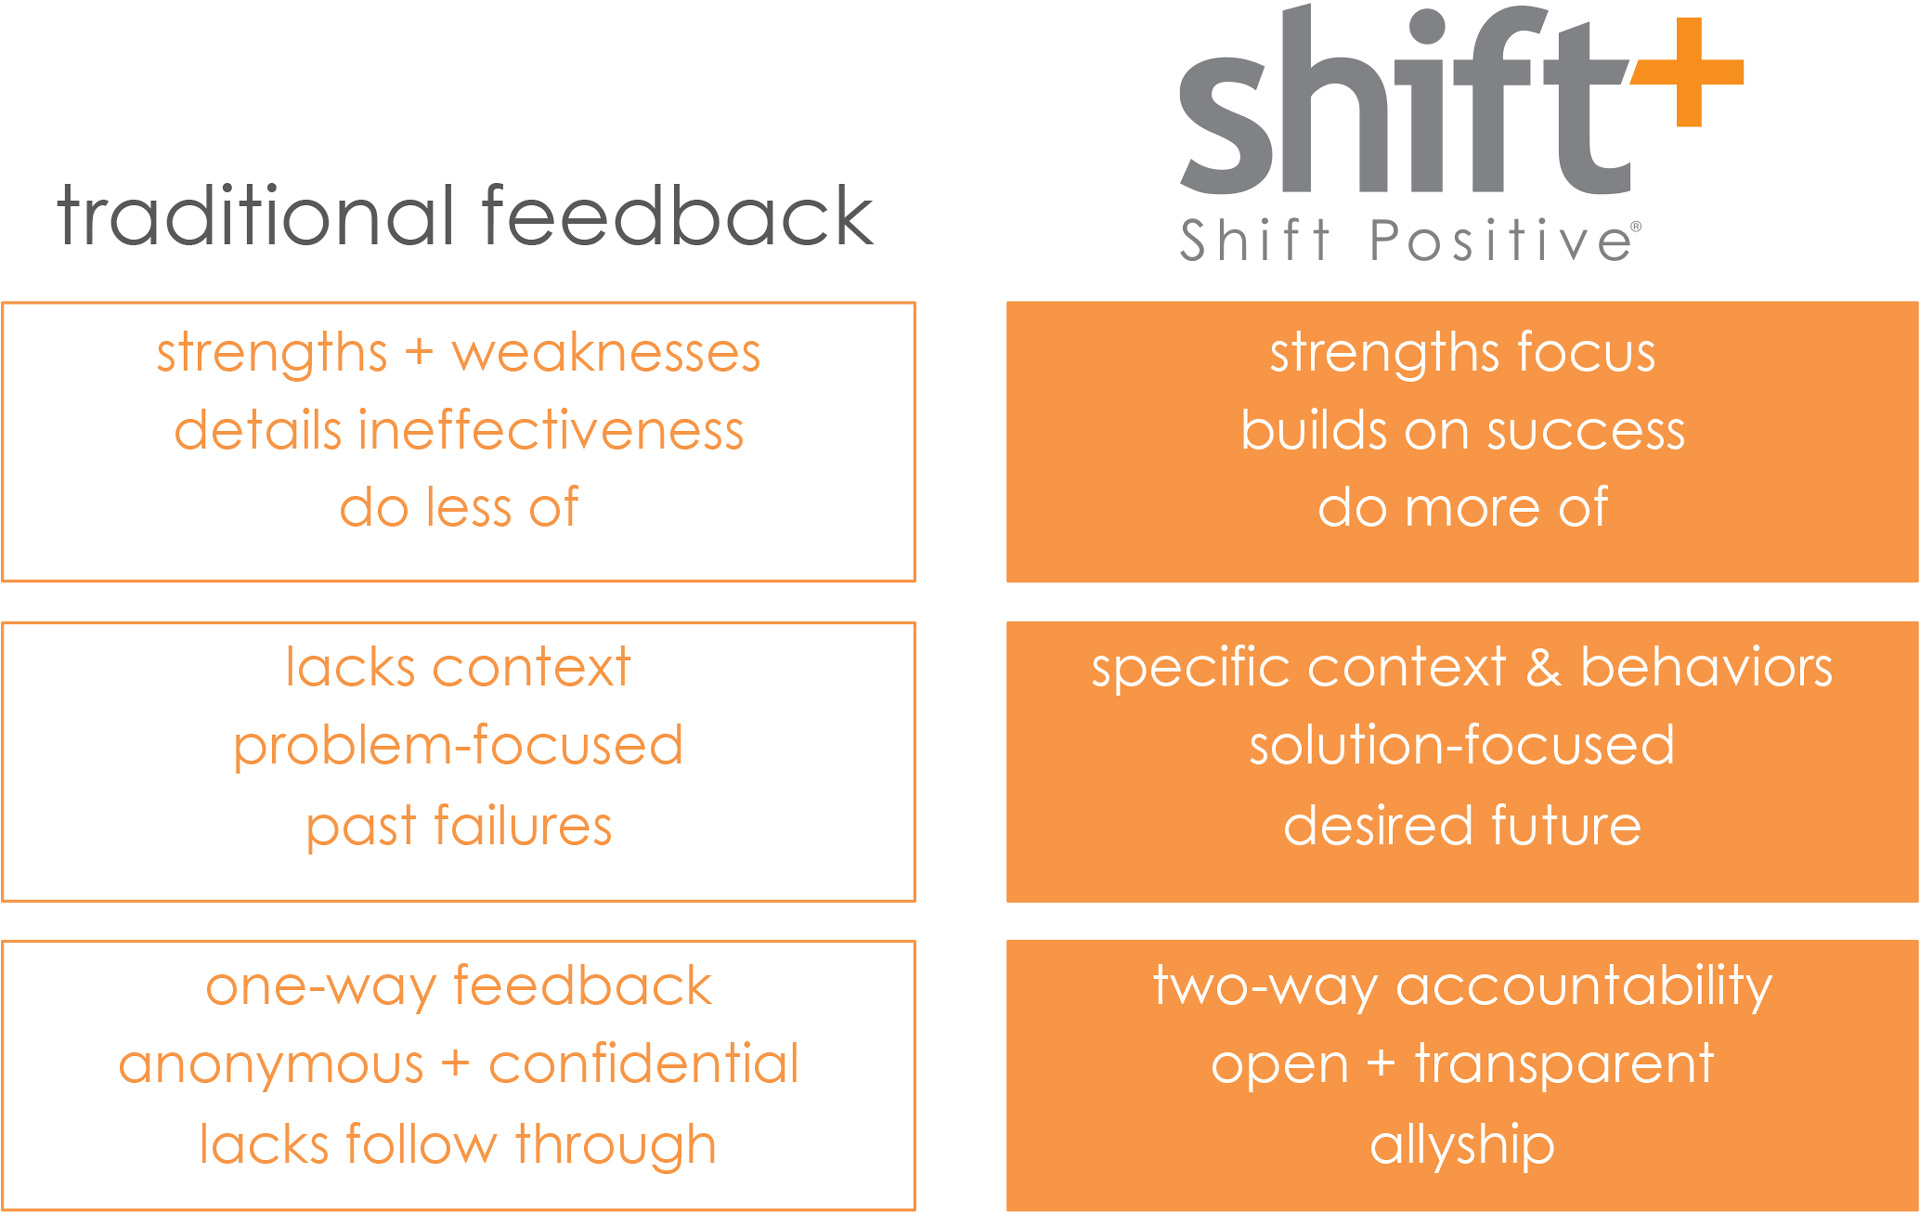 An illustration displaying a comparison chart between traditional feedback methods and Shift Positive feedback methods. The chart contrasts various aspects of both approaches, highlighting differences in effectiveness, engagement, and outcomes. Shift Positive methods emphasize proactive, collaborative, and constructive feedback practices, fostering growth and positive change.